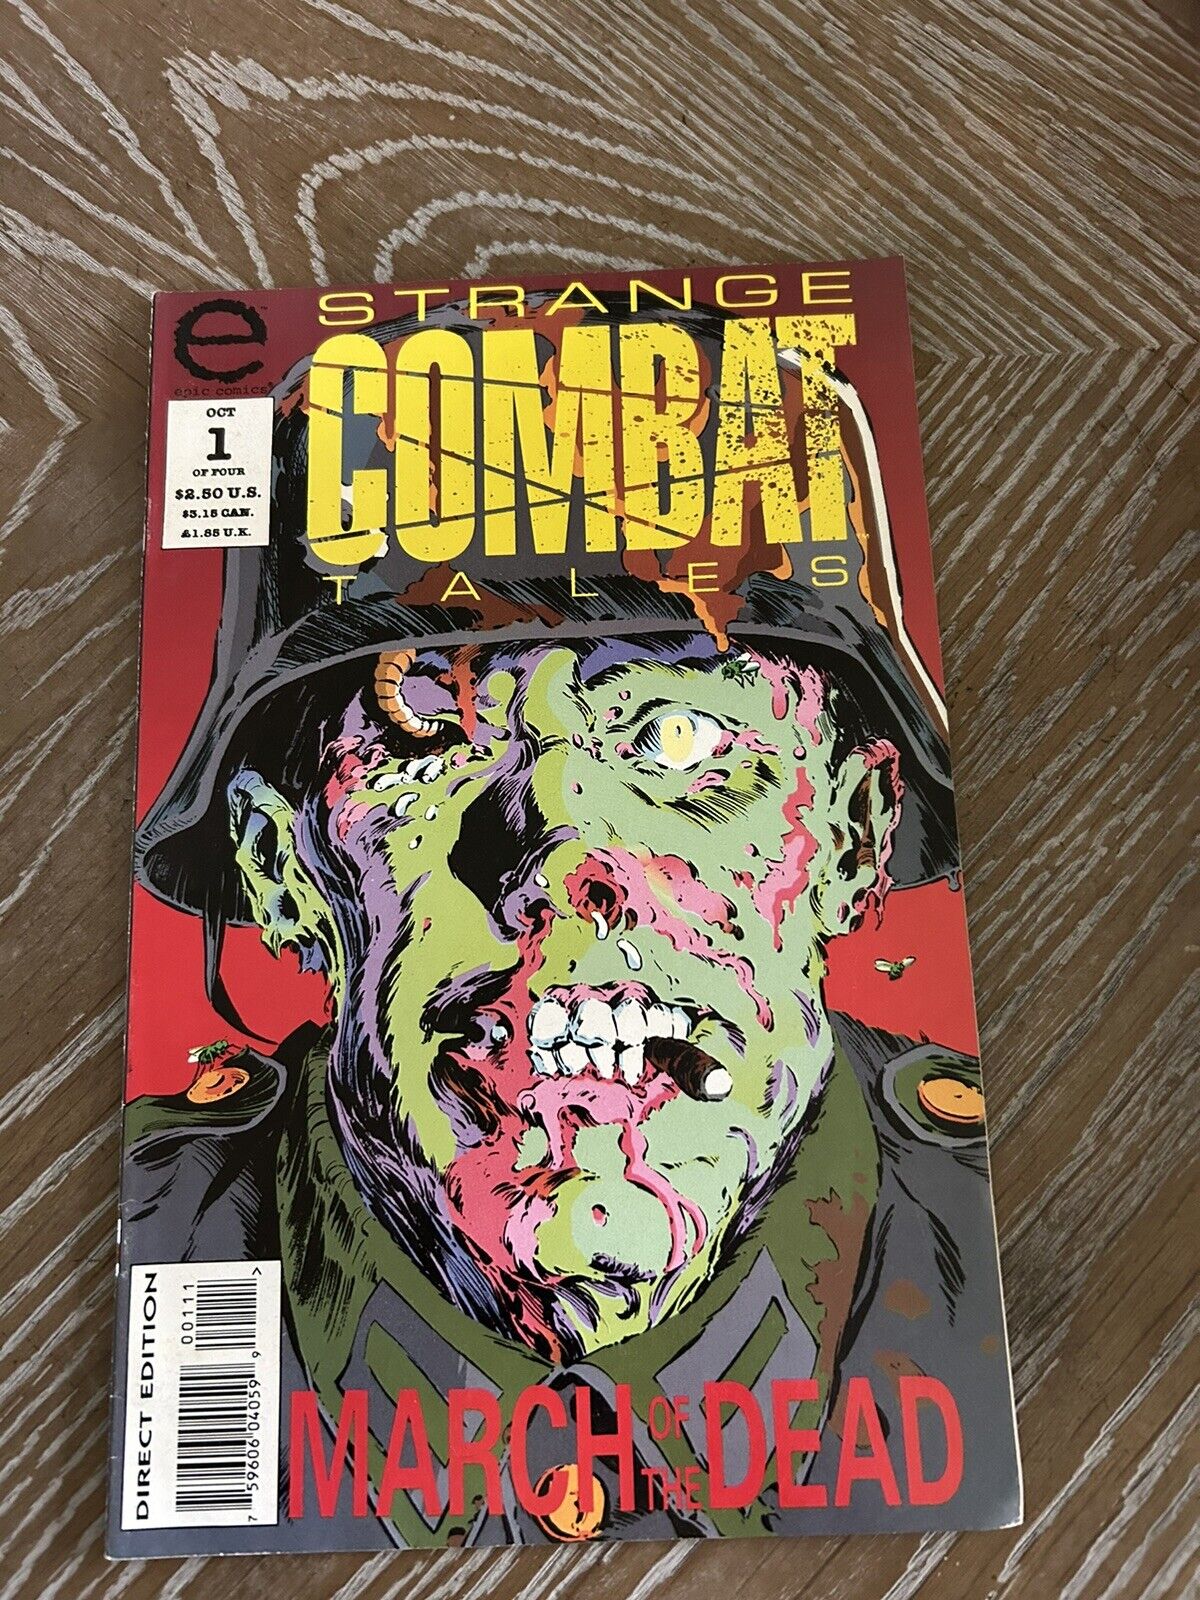 Strange Combat Tales #1 - March of the Dead